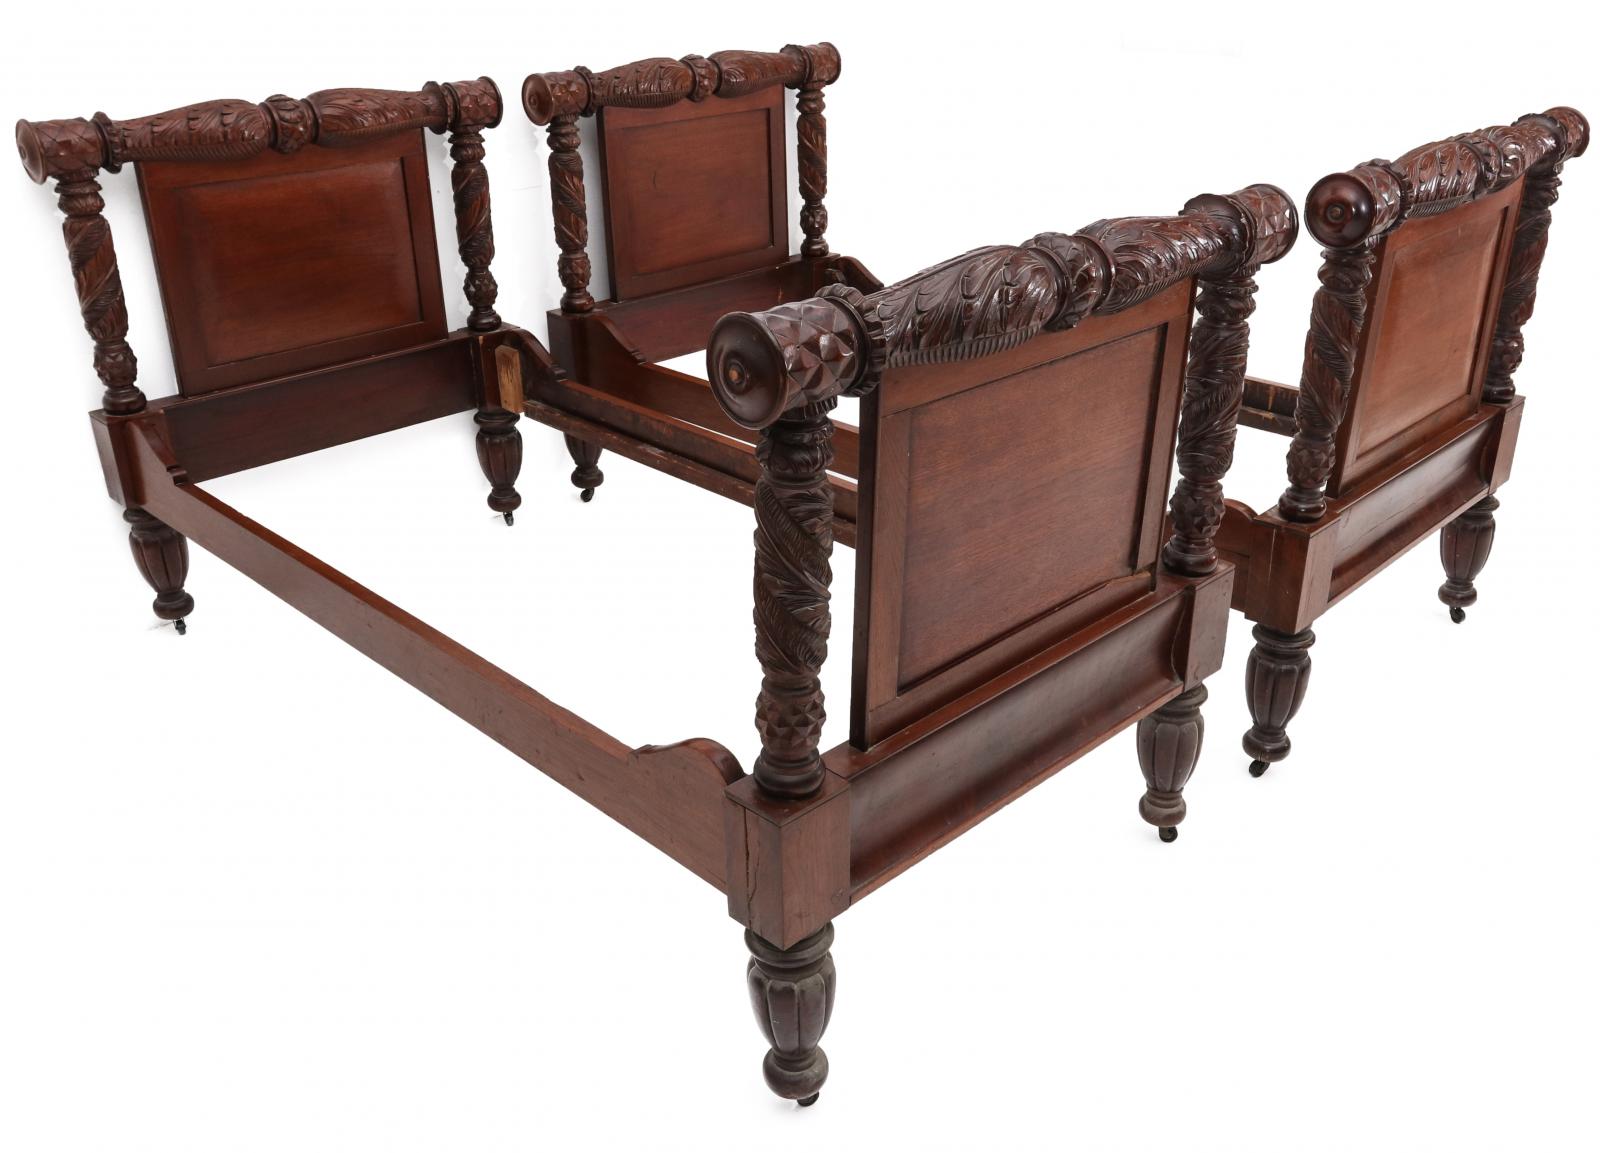 A PAIR 19TH C AMERICAN HEAVILY CARVED SLEIGH BEDS